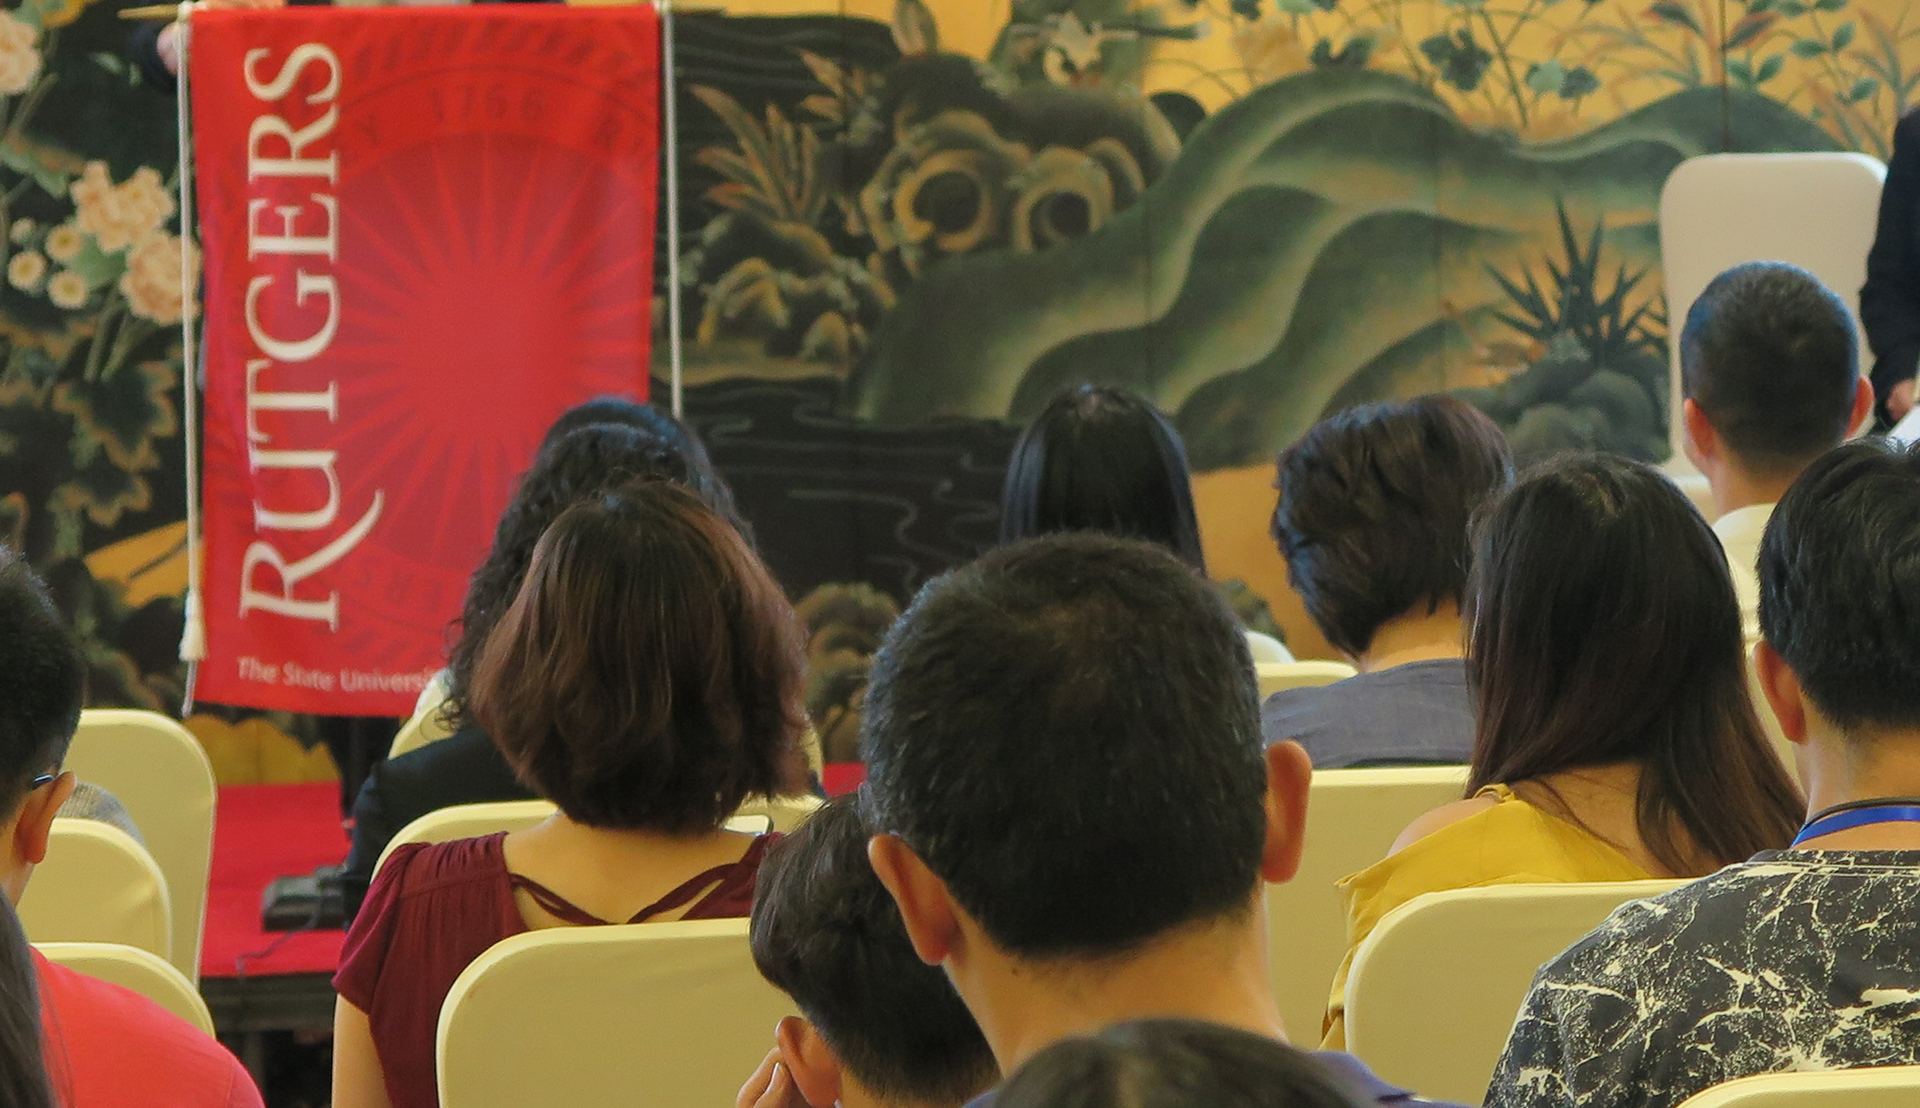 Rutgers Global - Rutgers Hosts First Pre-Departure Orientation in China for U.S.-Bound Undergraduate Chinese Students, student attendees look on to a stage where a podium with a Rutgers drape is positioned